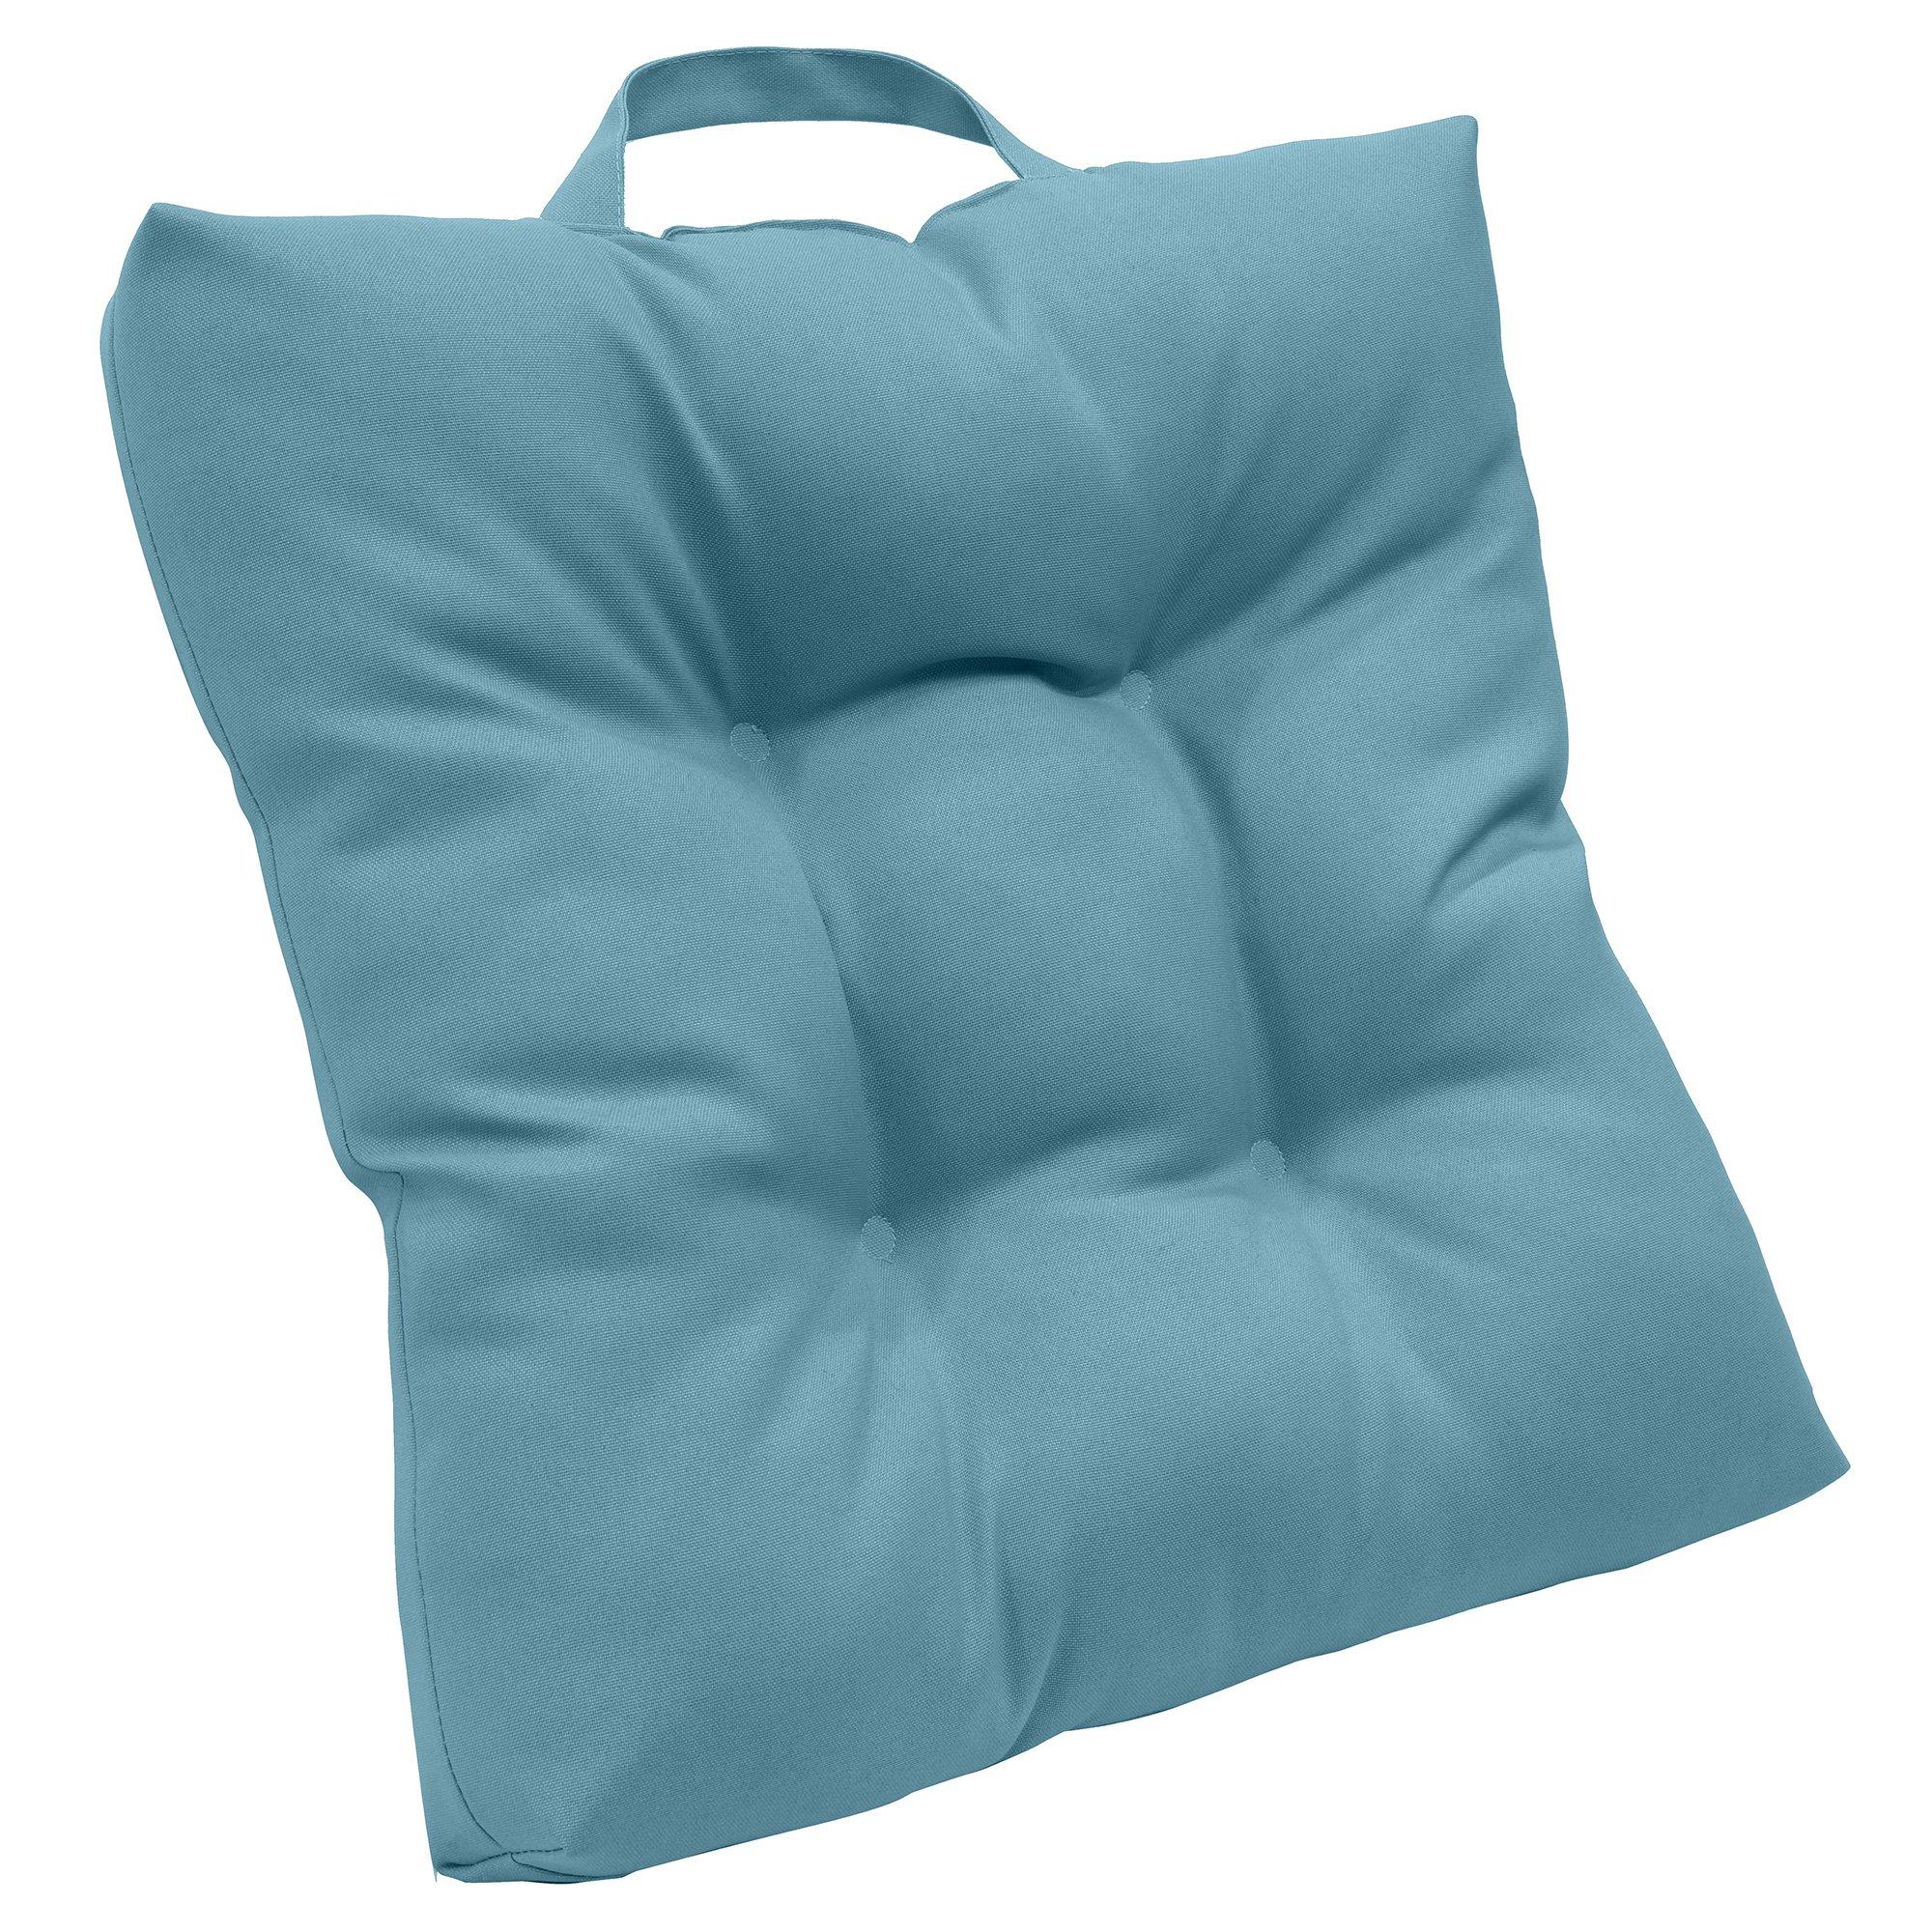 By Commonwealth Single Seat Cushion